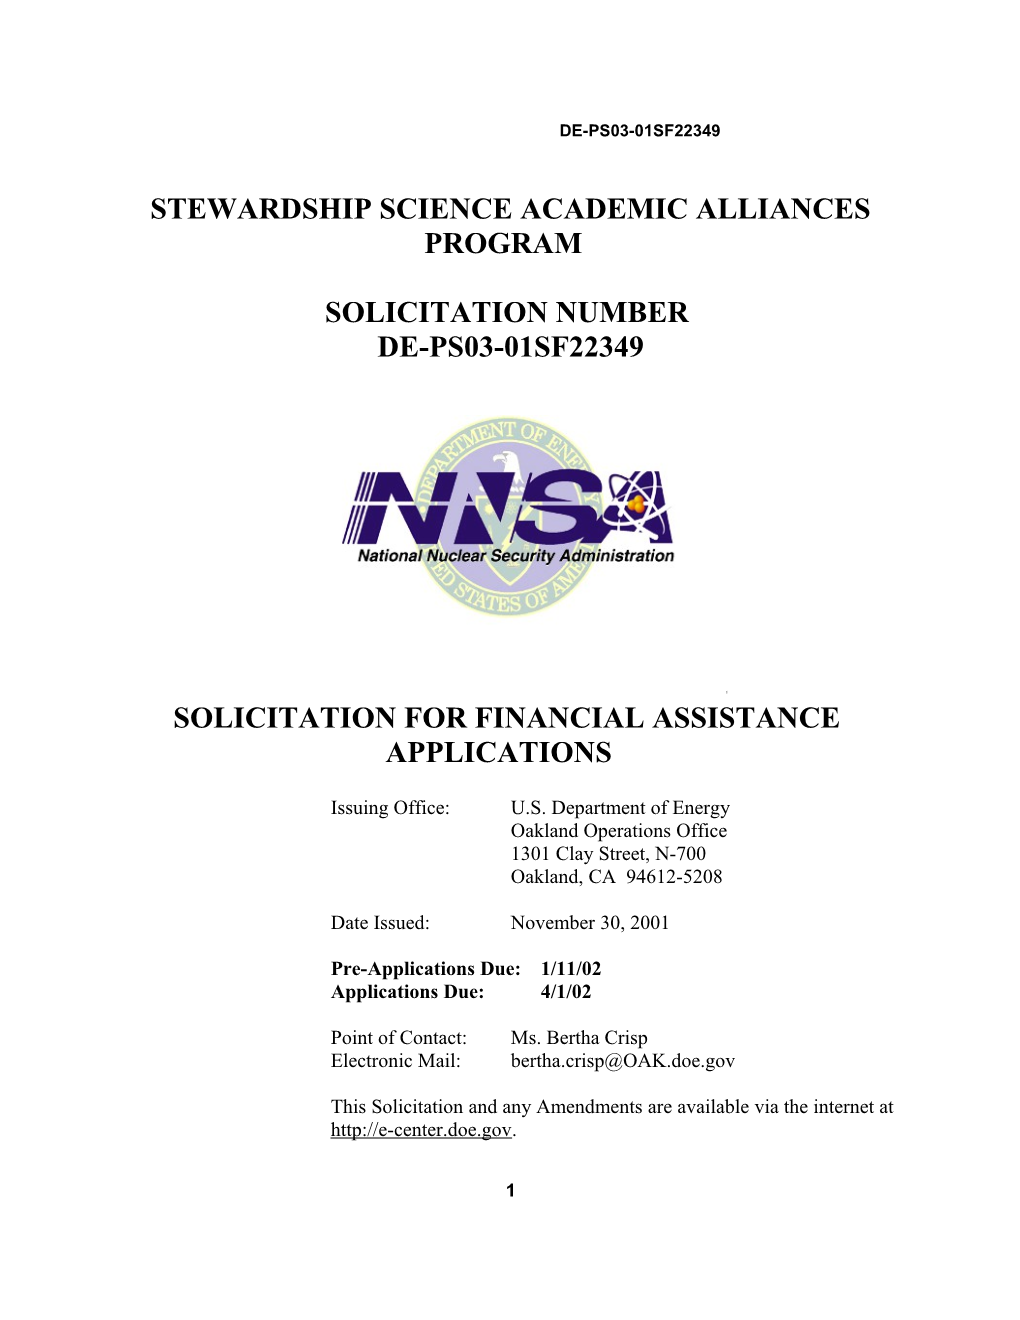 Solicitation for Financial Assistance